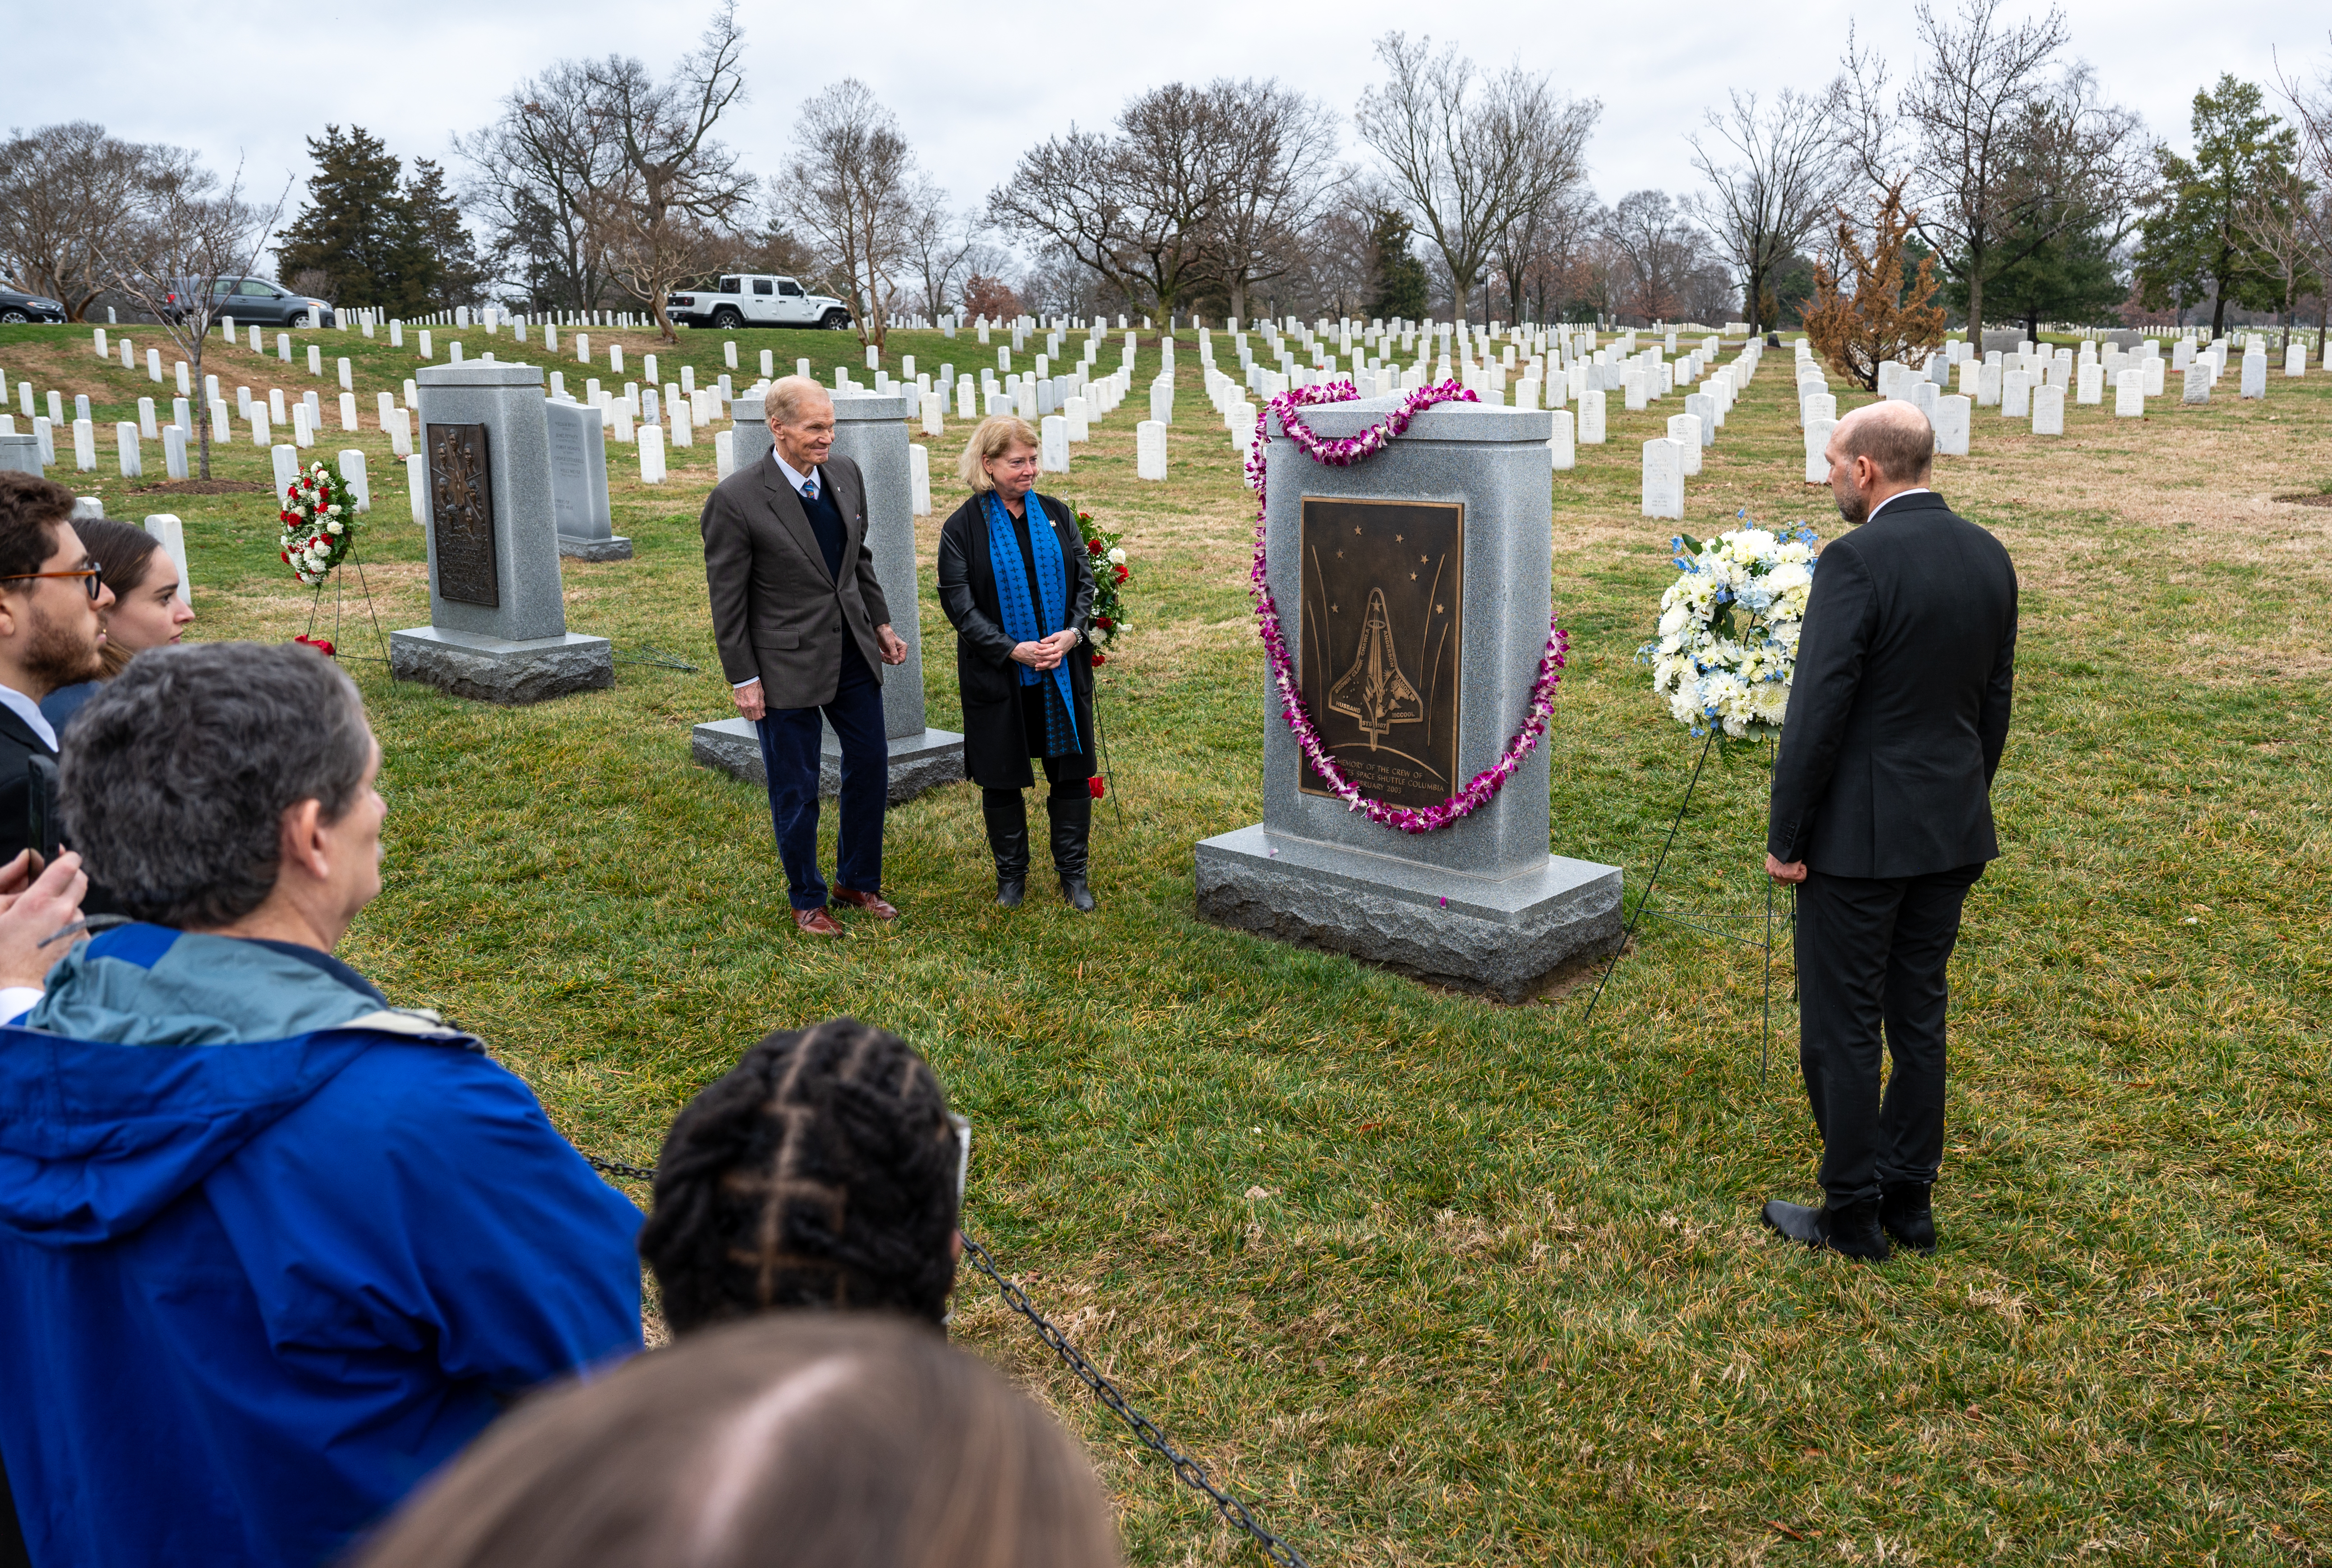 NASA’s Day of Remembrance: Honoring Fallen Heroes